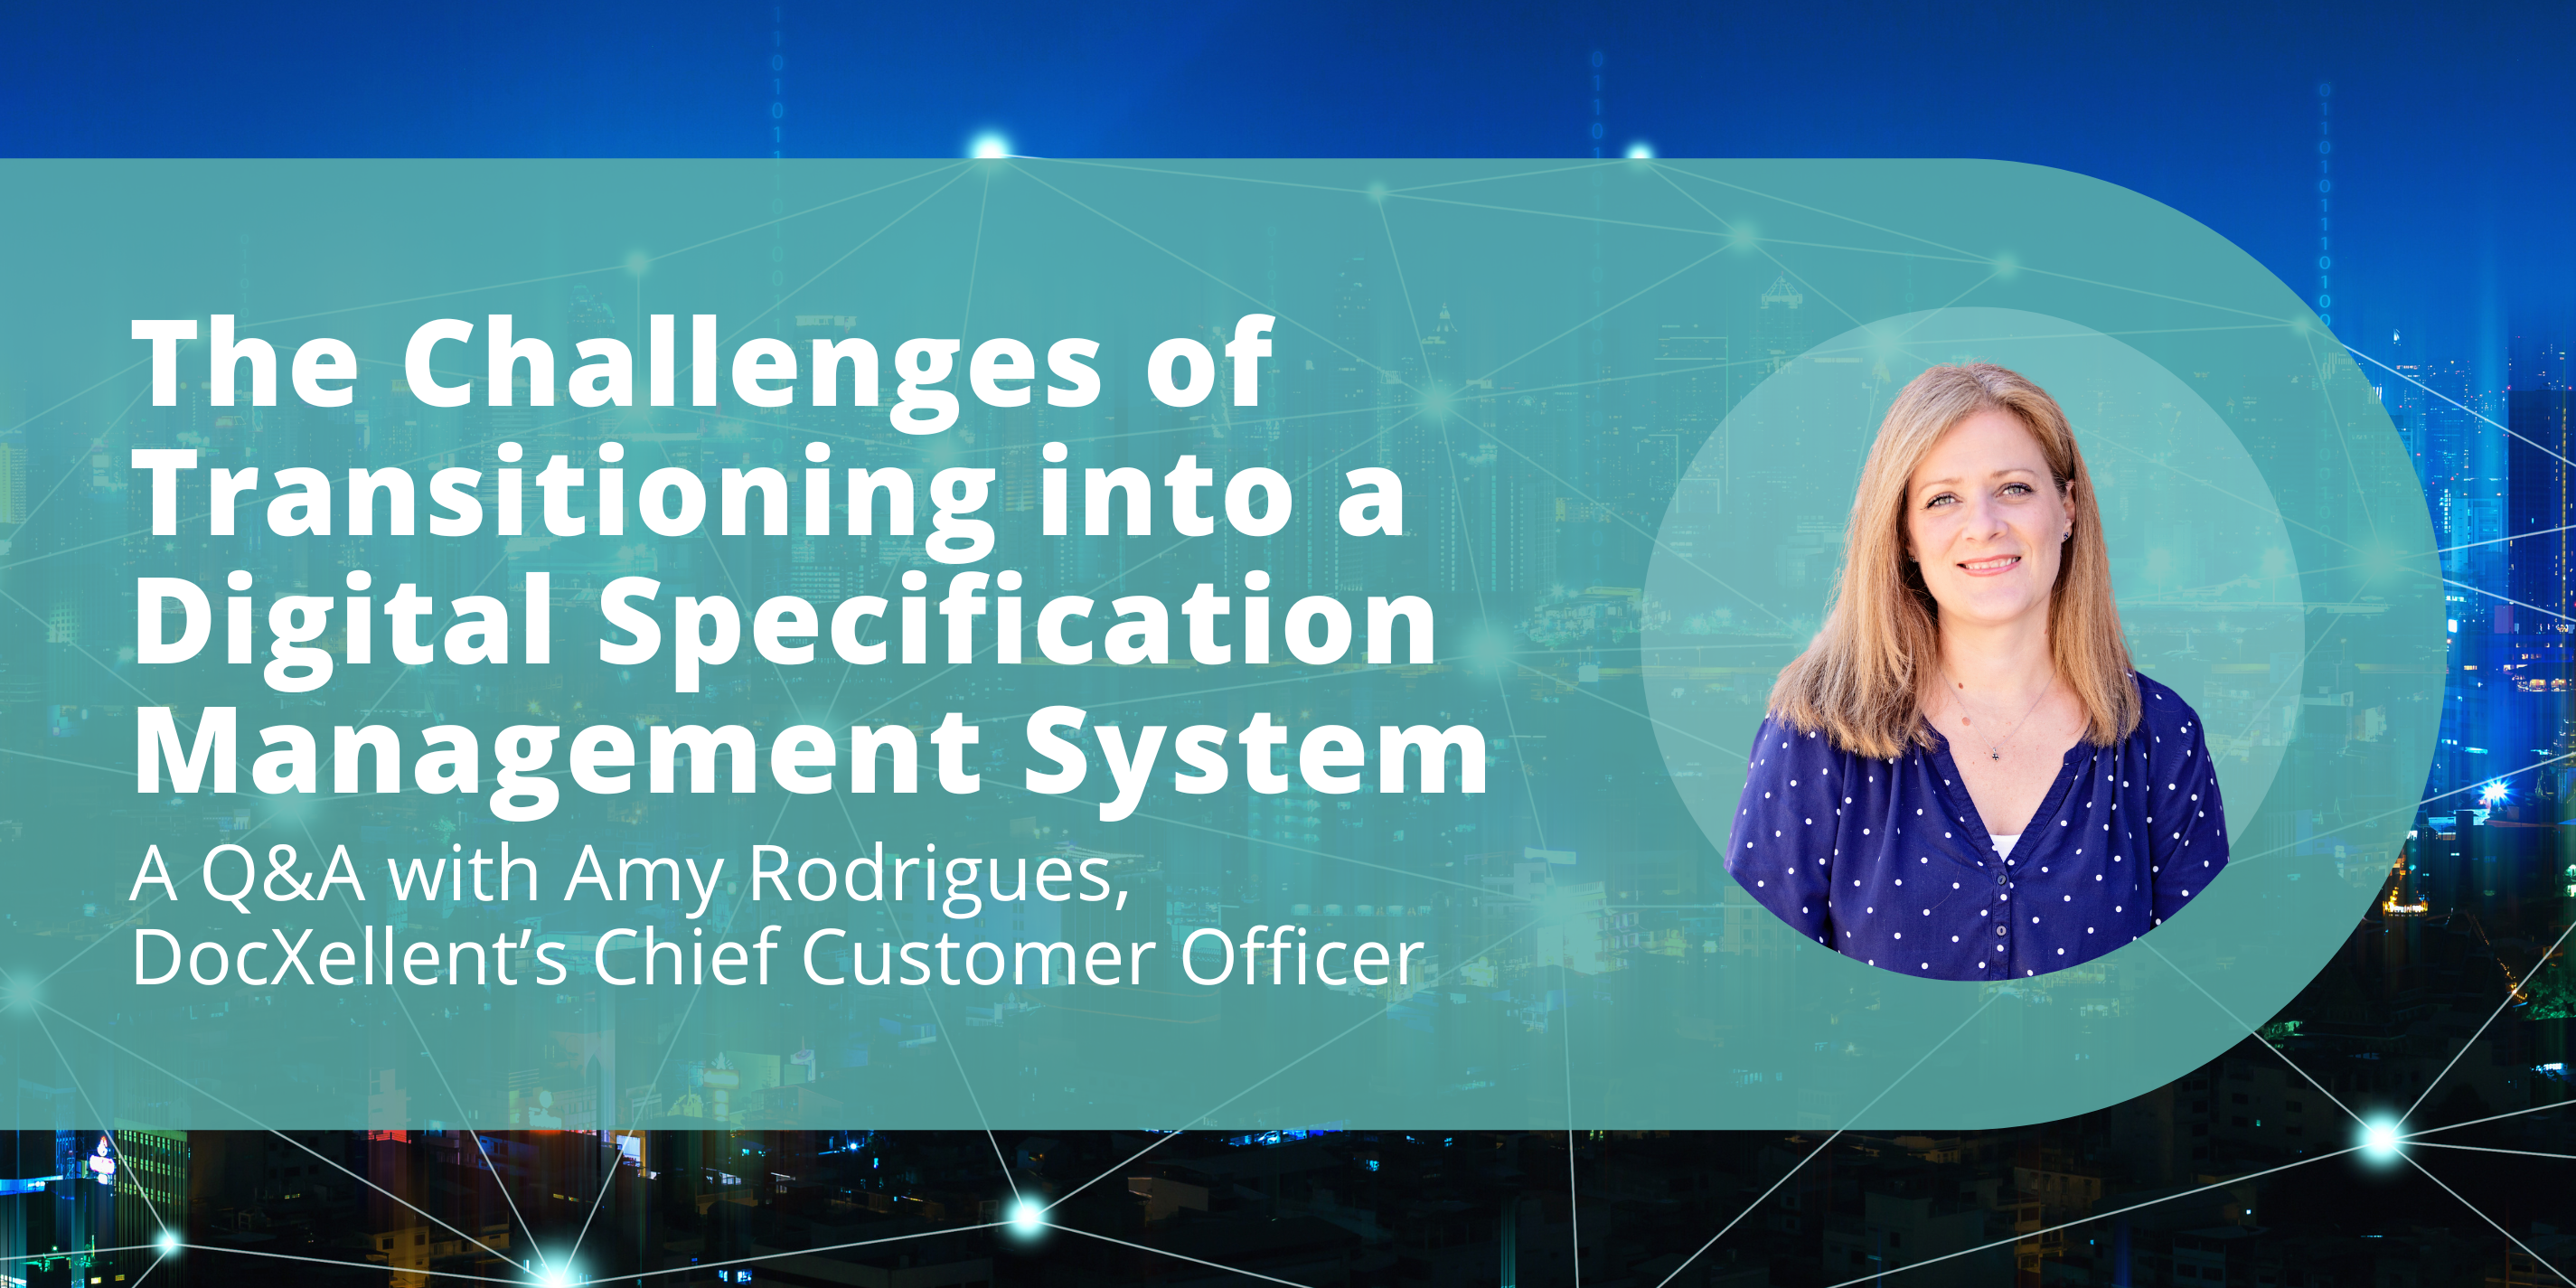 The Challenges of Transitioning into a Digital Specification Management System